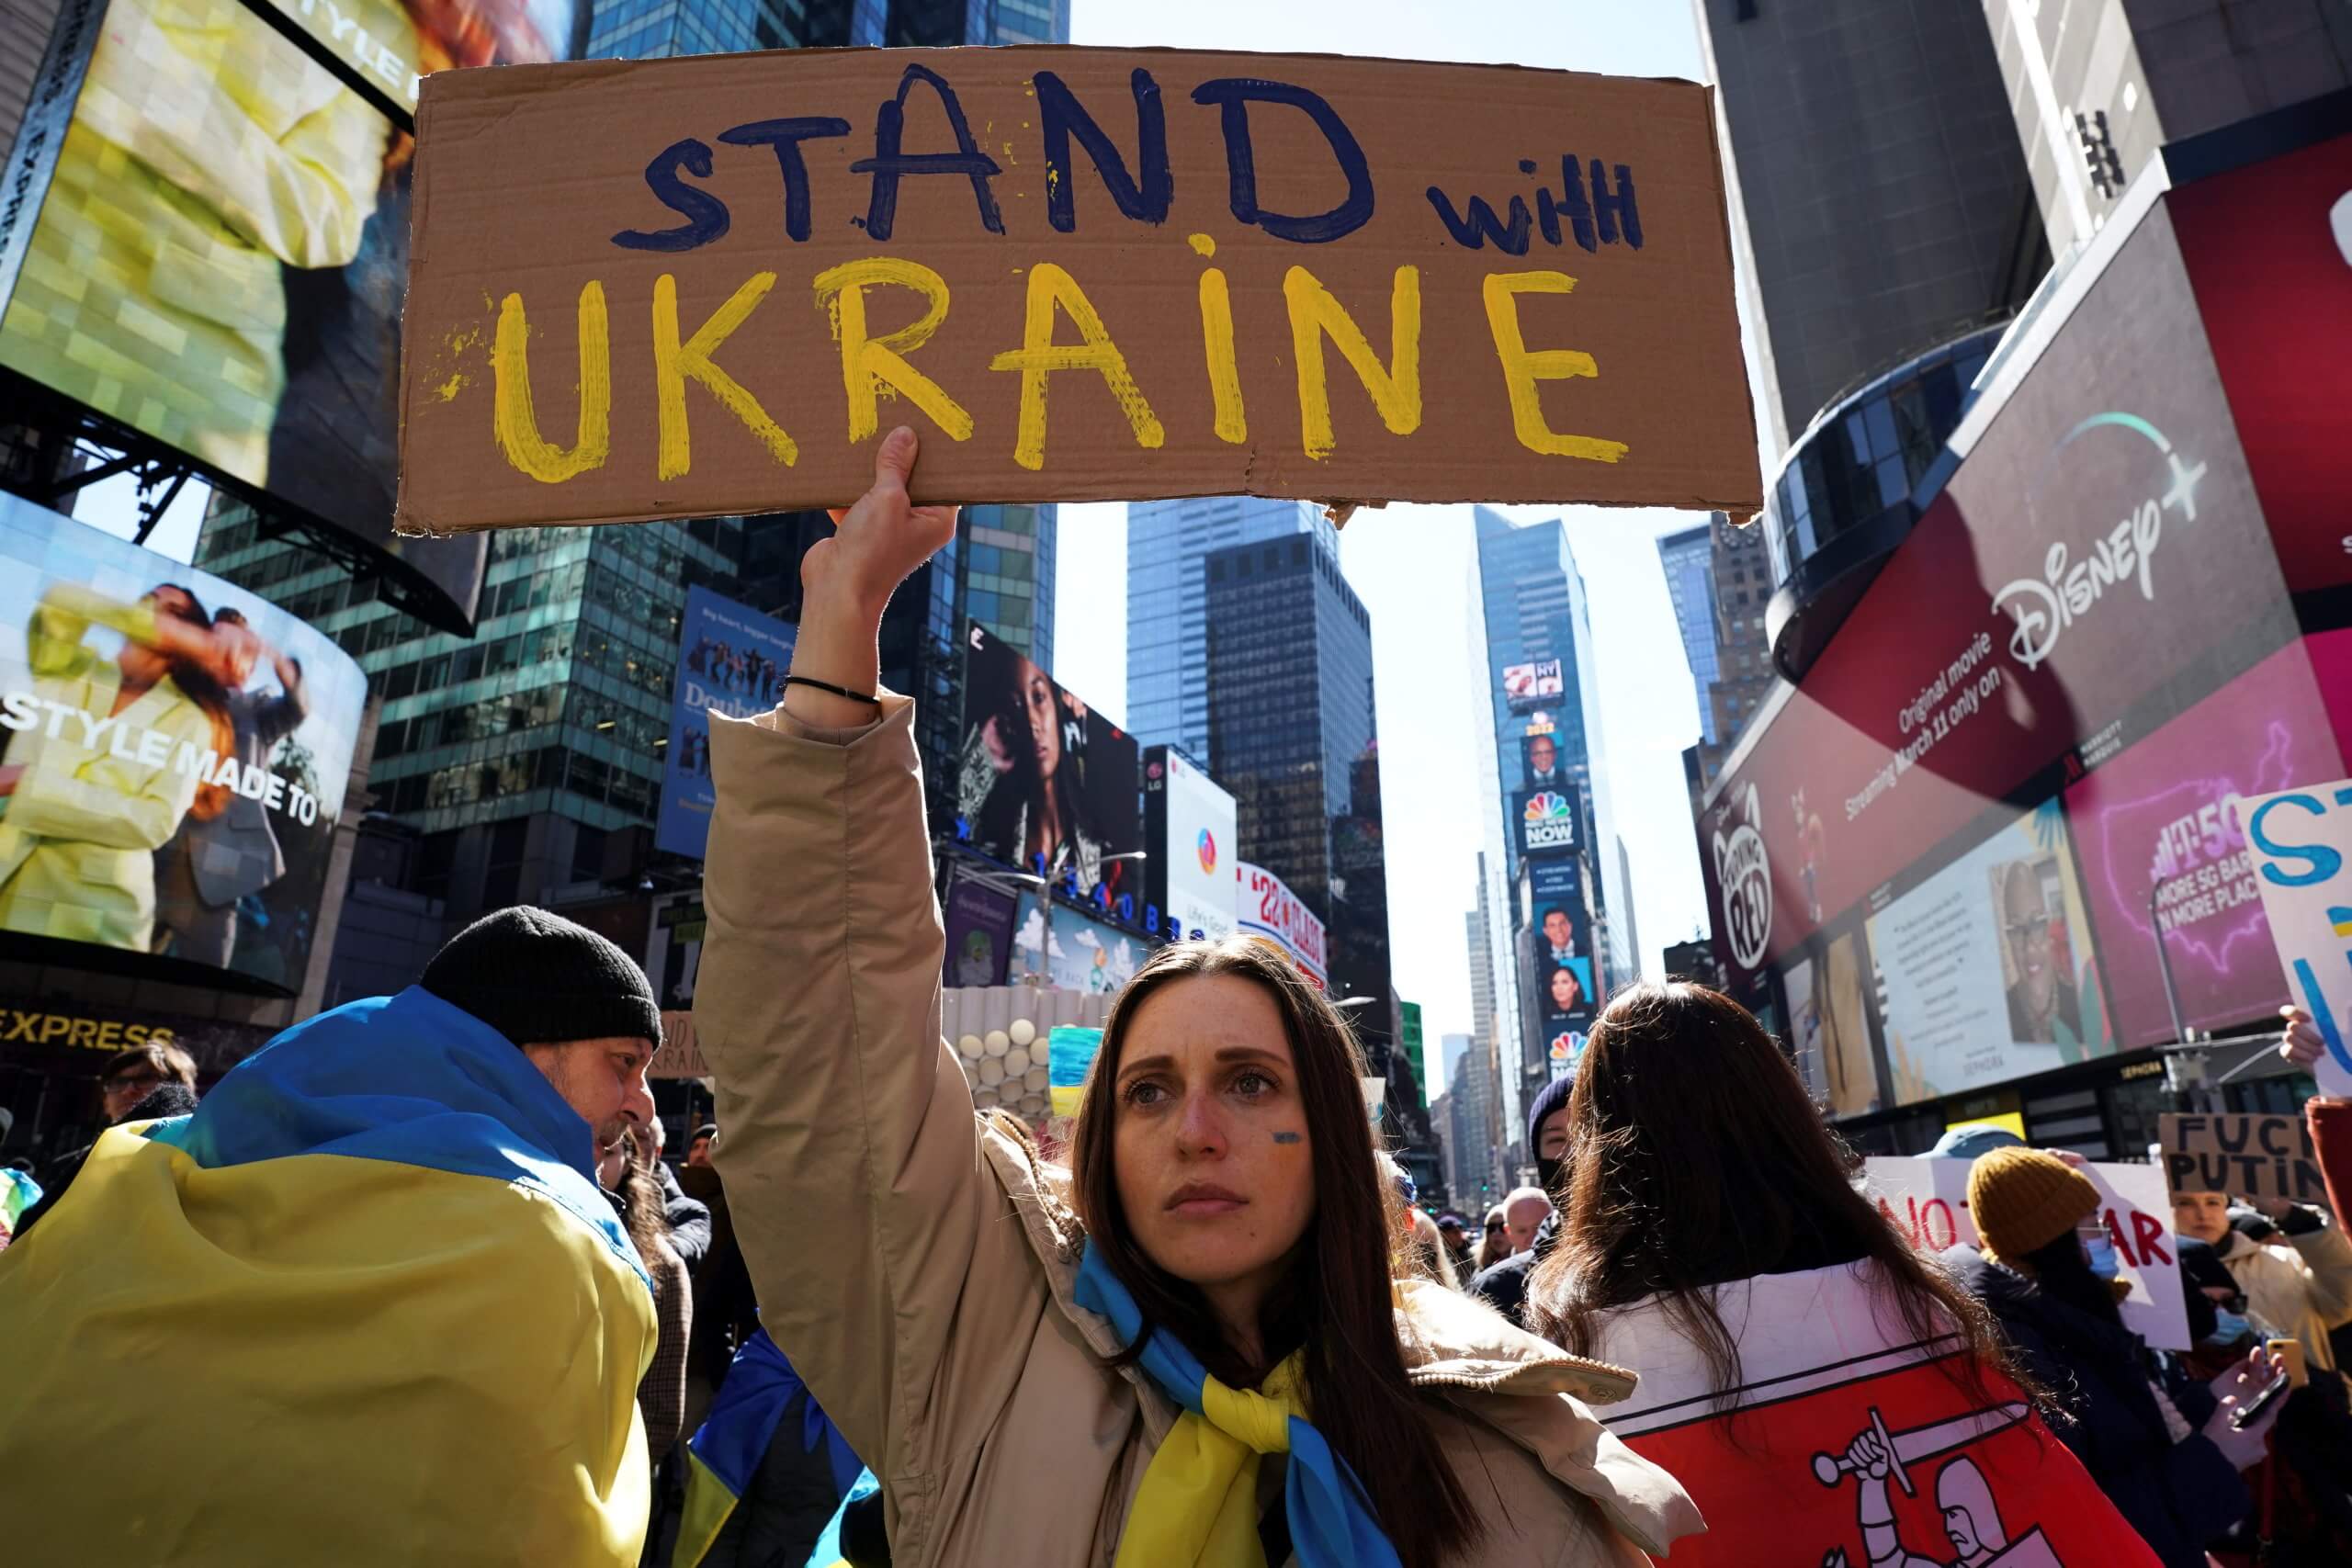 2022 02 26T175644Z 1996716597 RC2TRS9P018Z RTRMADP 3 UKRAINE CRISIS USA PROTESTS scaled SEE IT: New York stands united with Ukraine at latest rally in Times Square